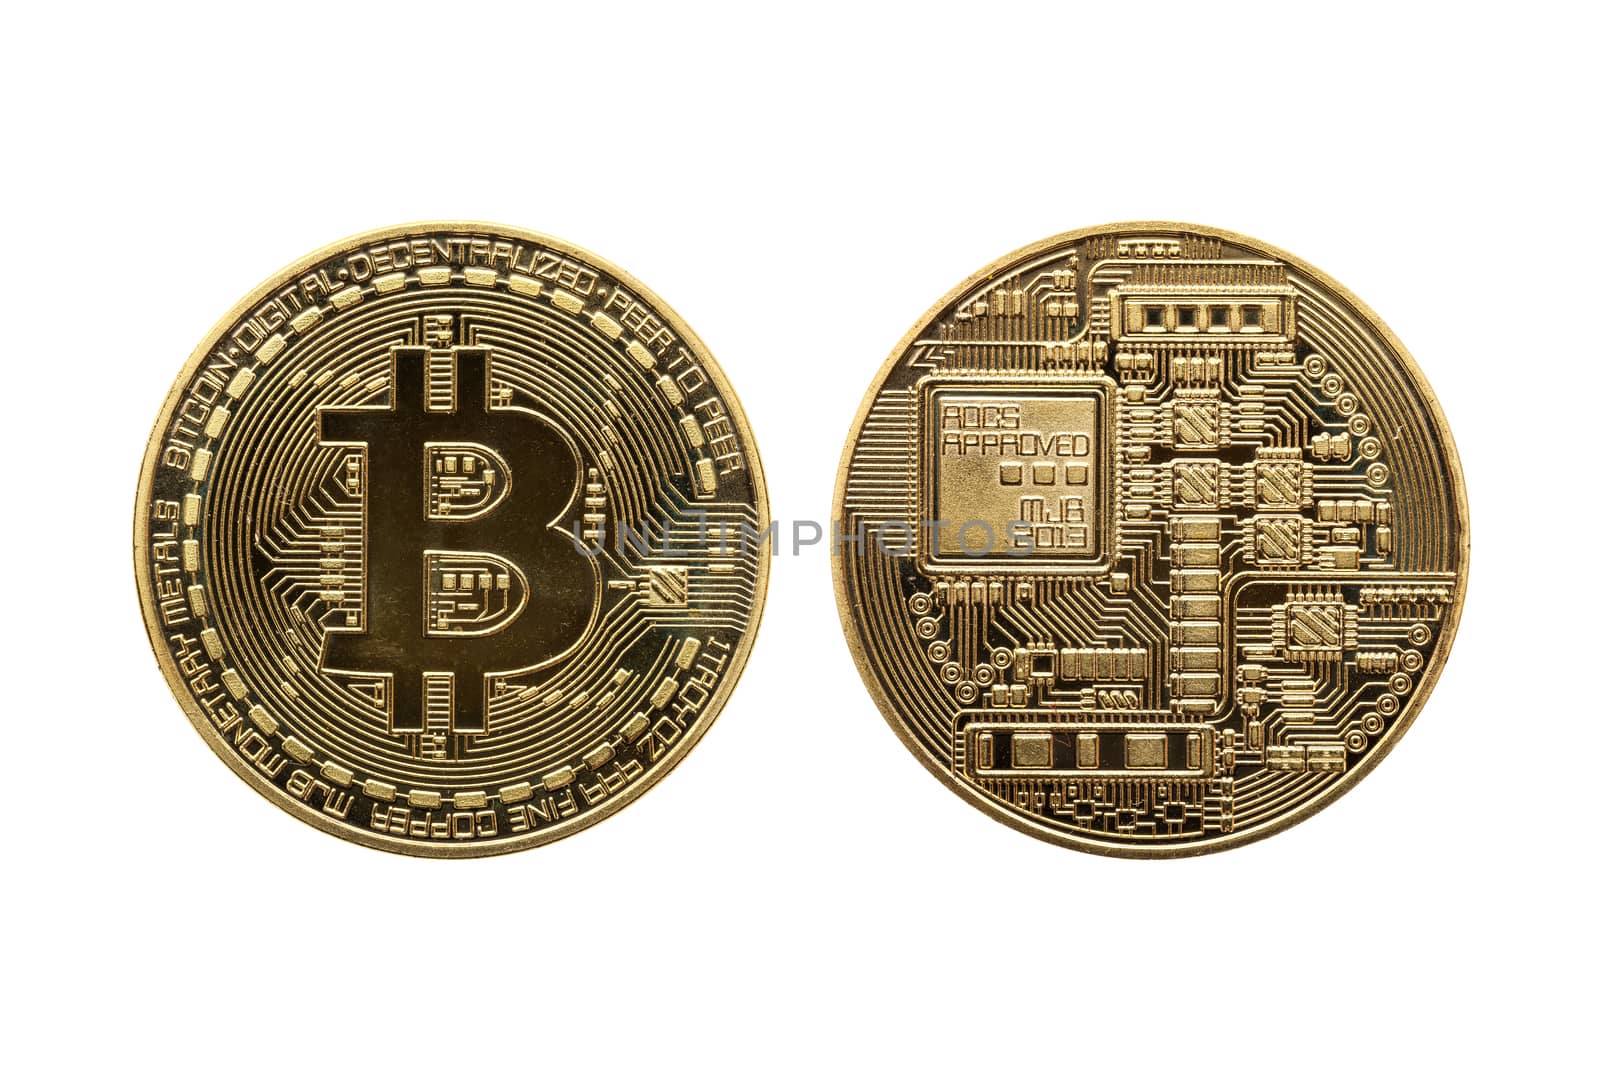 Gold Bitcoin cryptocurrency money currency coin cut out and isolated on a white background